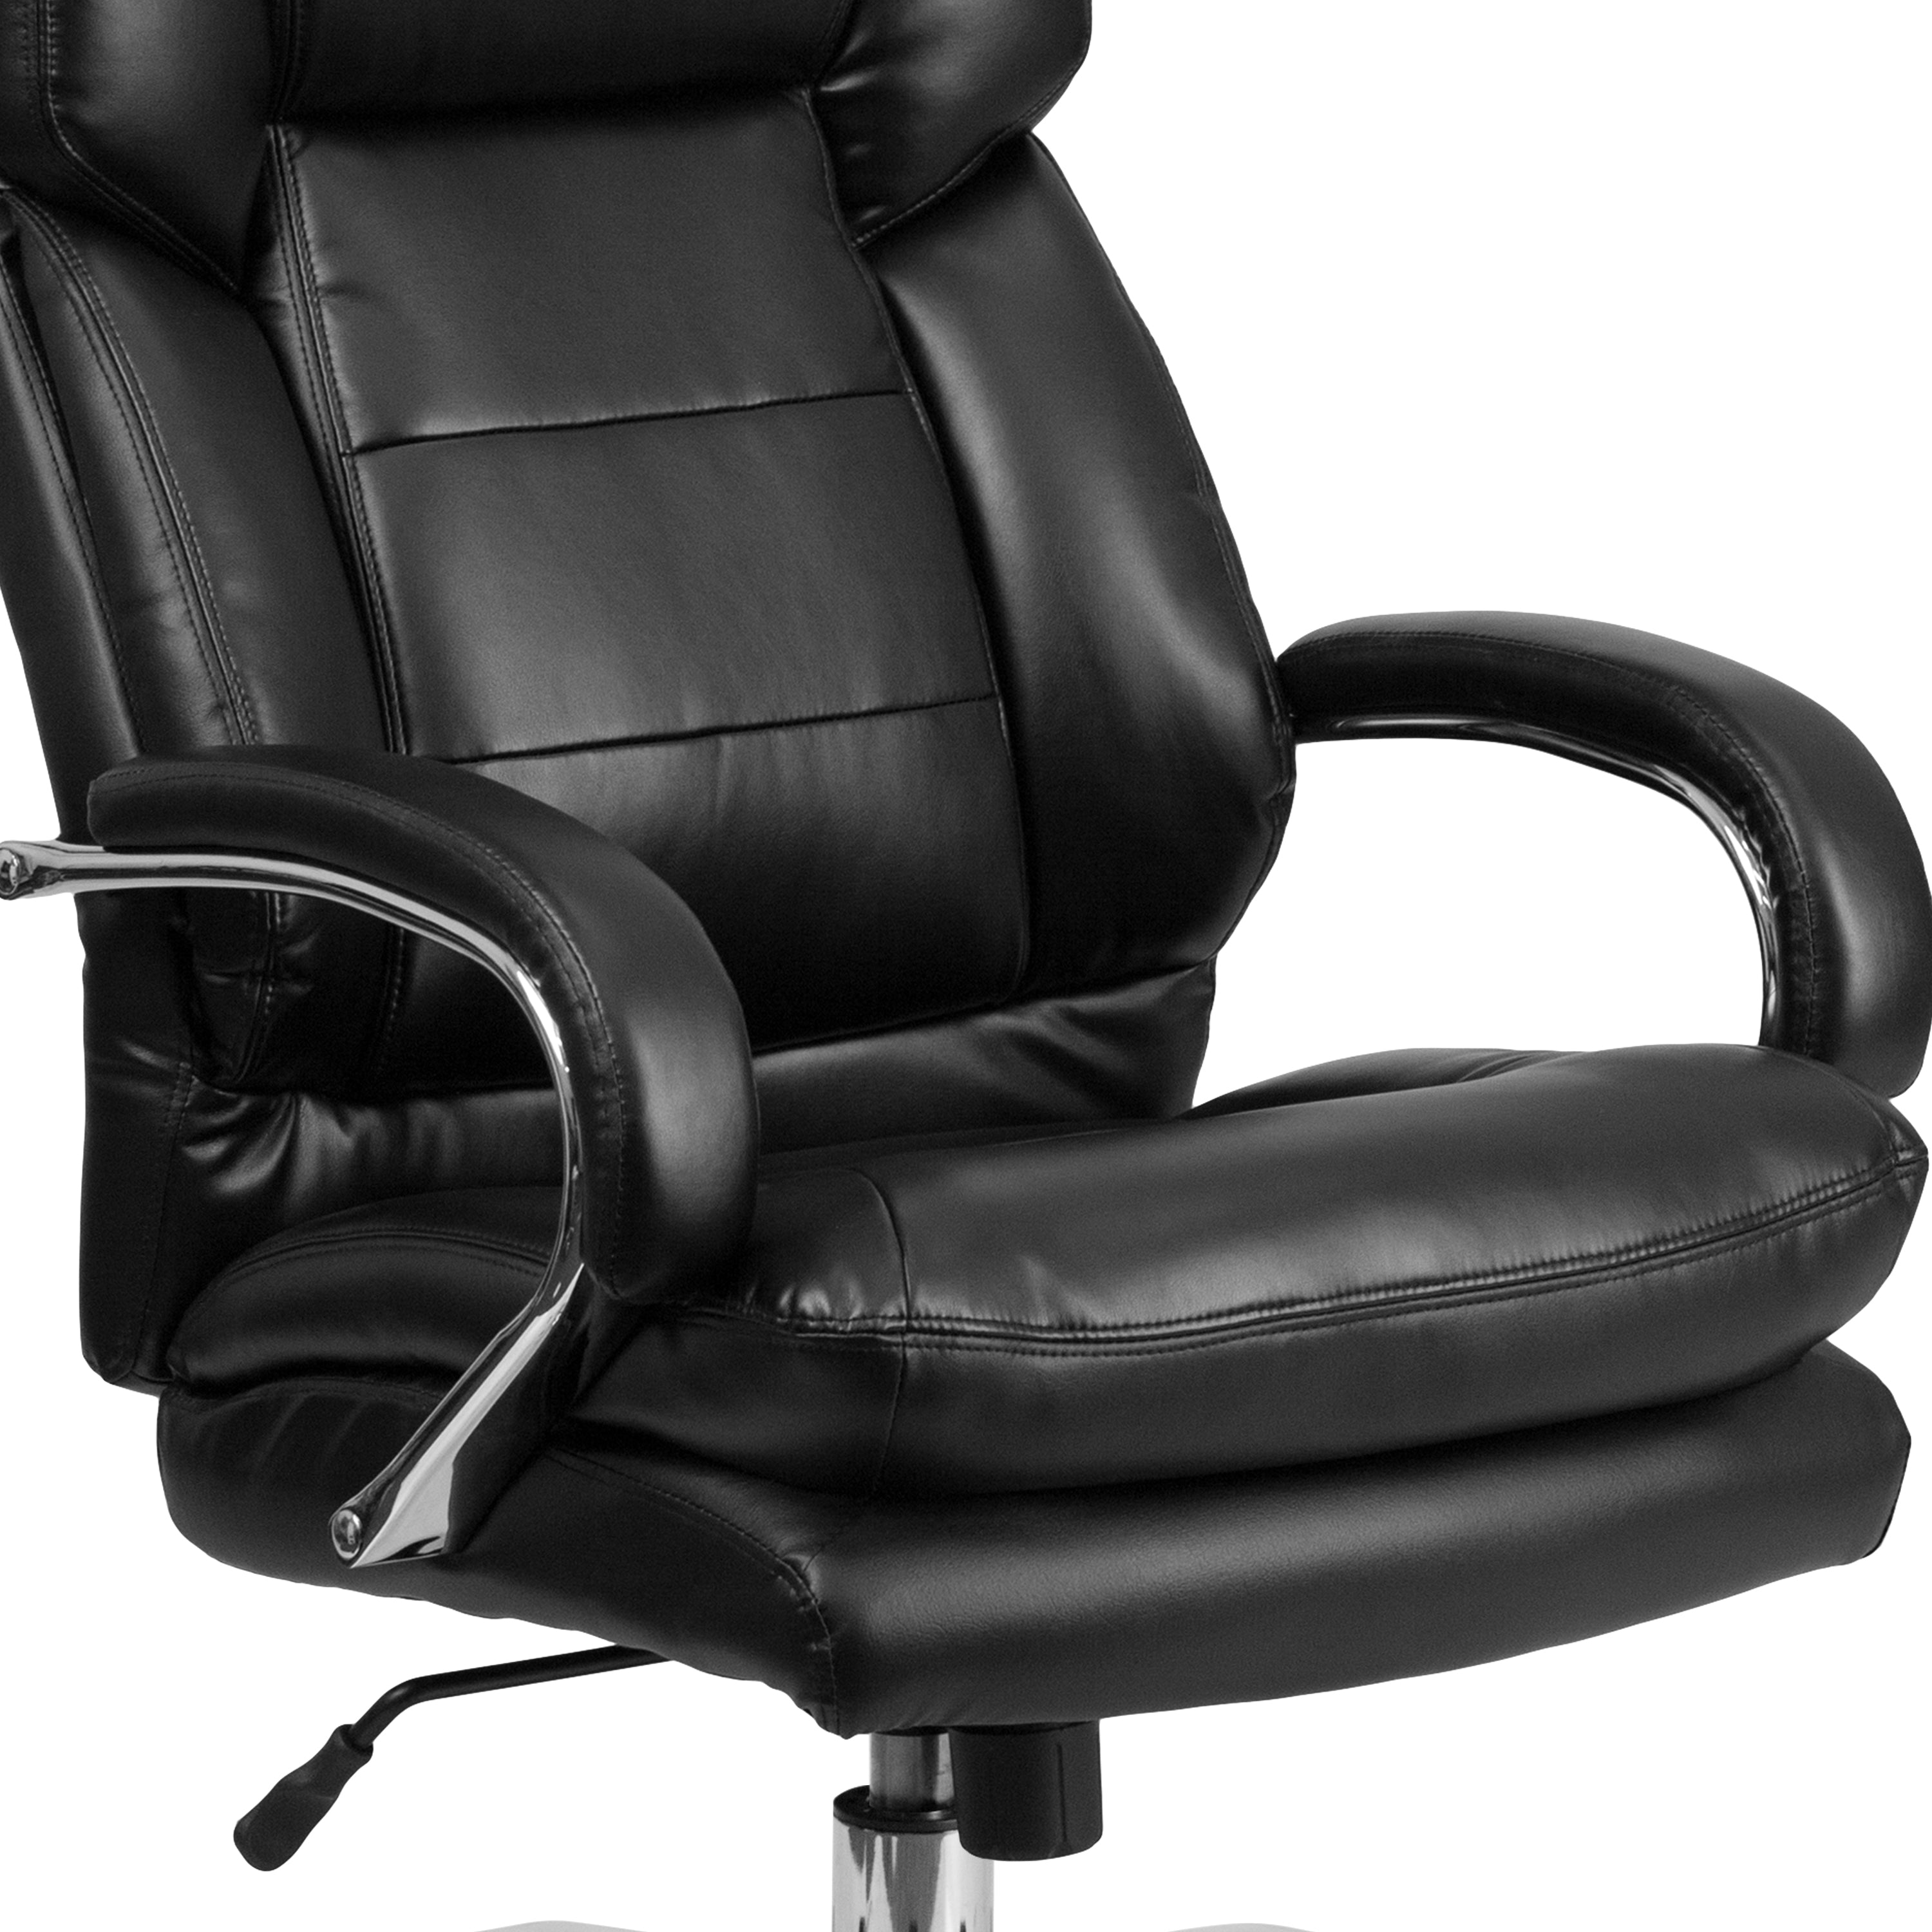 HERCULES Series 24/7 Intensive Use Big & Tall 500 lb. Rated Executive Swivel Ergonomic Office Chair with Loop Arms-Big & Tall Office Chair-Flash Furniture-Wall2Wall Furnishings